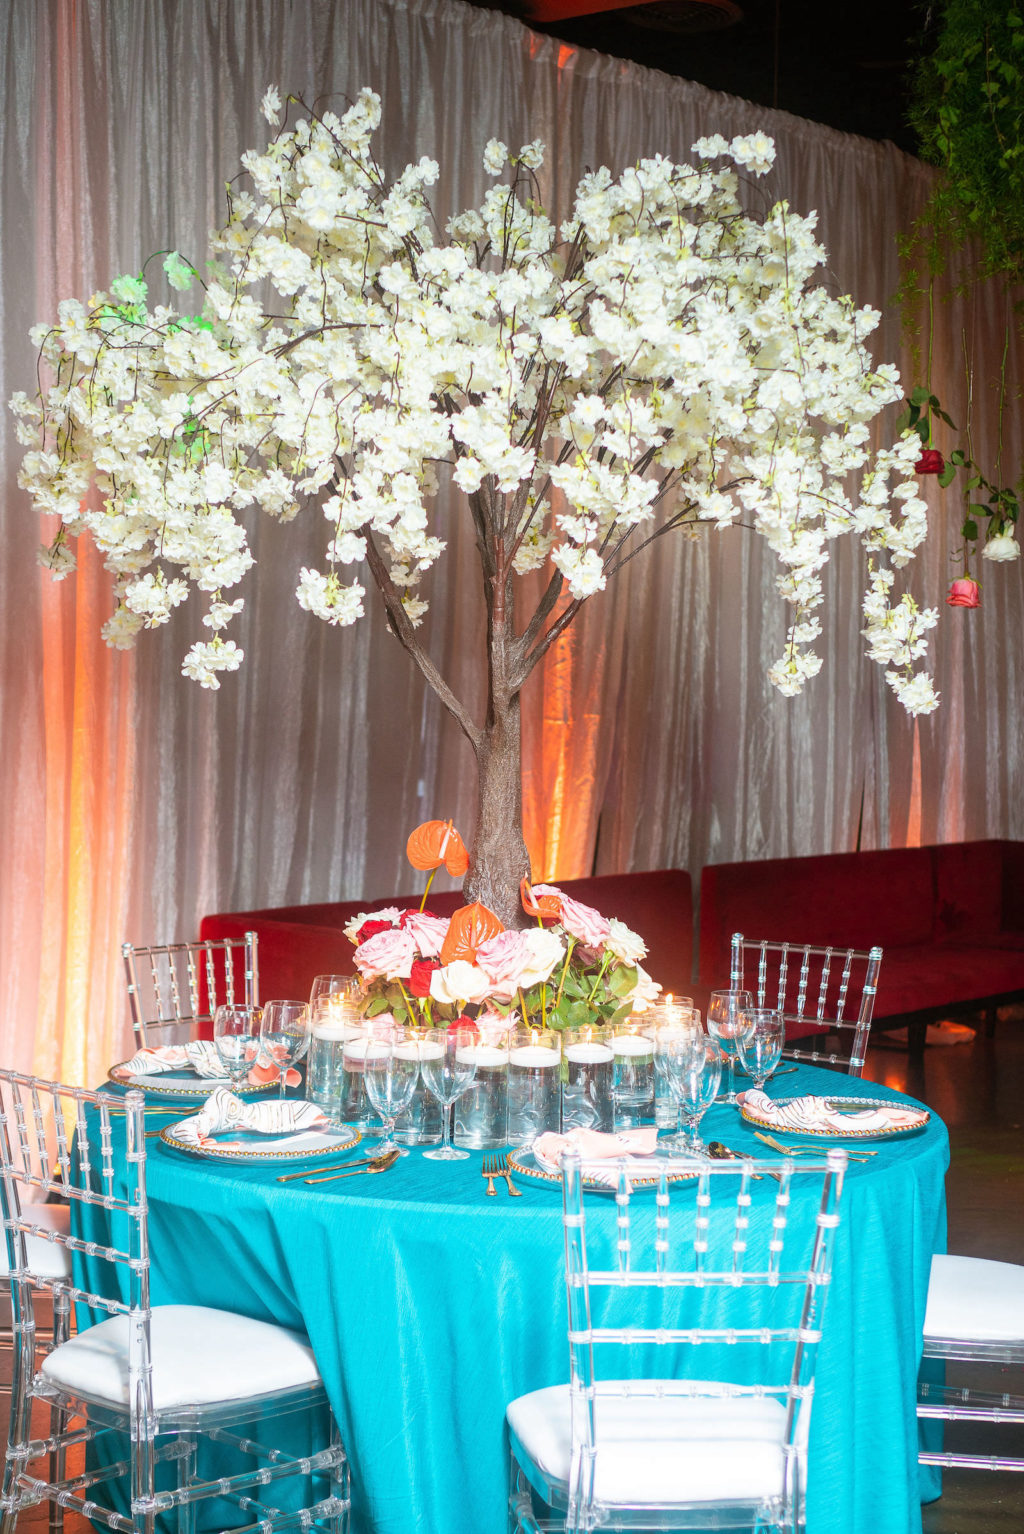 Modern Reception Decor, Round Table with Elaborate Centerpiece, Tall Tree with White Flowers Towering Over Aqua Blue Linens and Ghost Chiavari Chairs